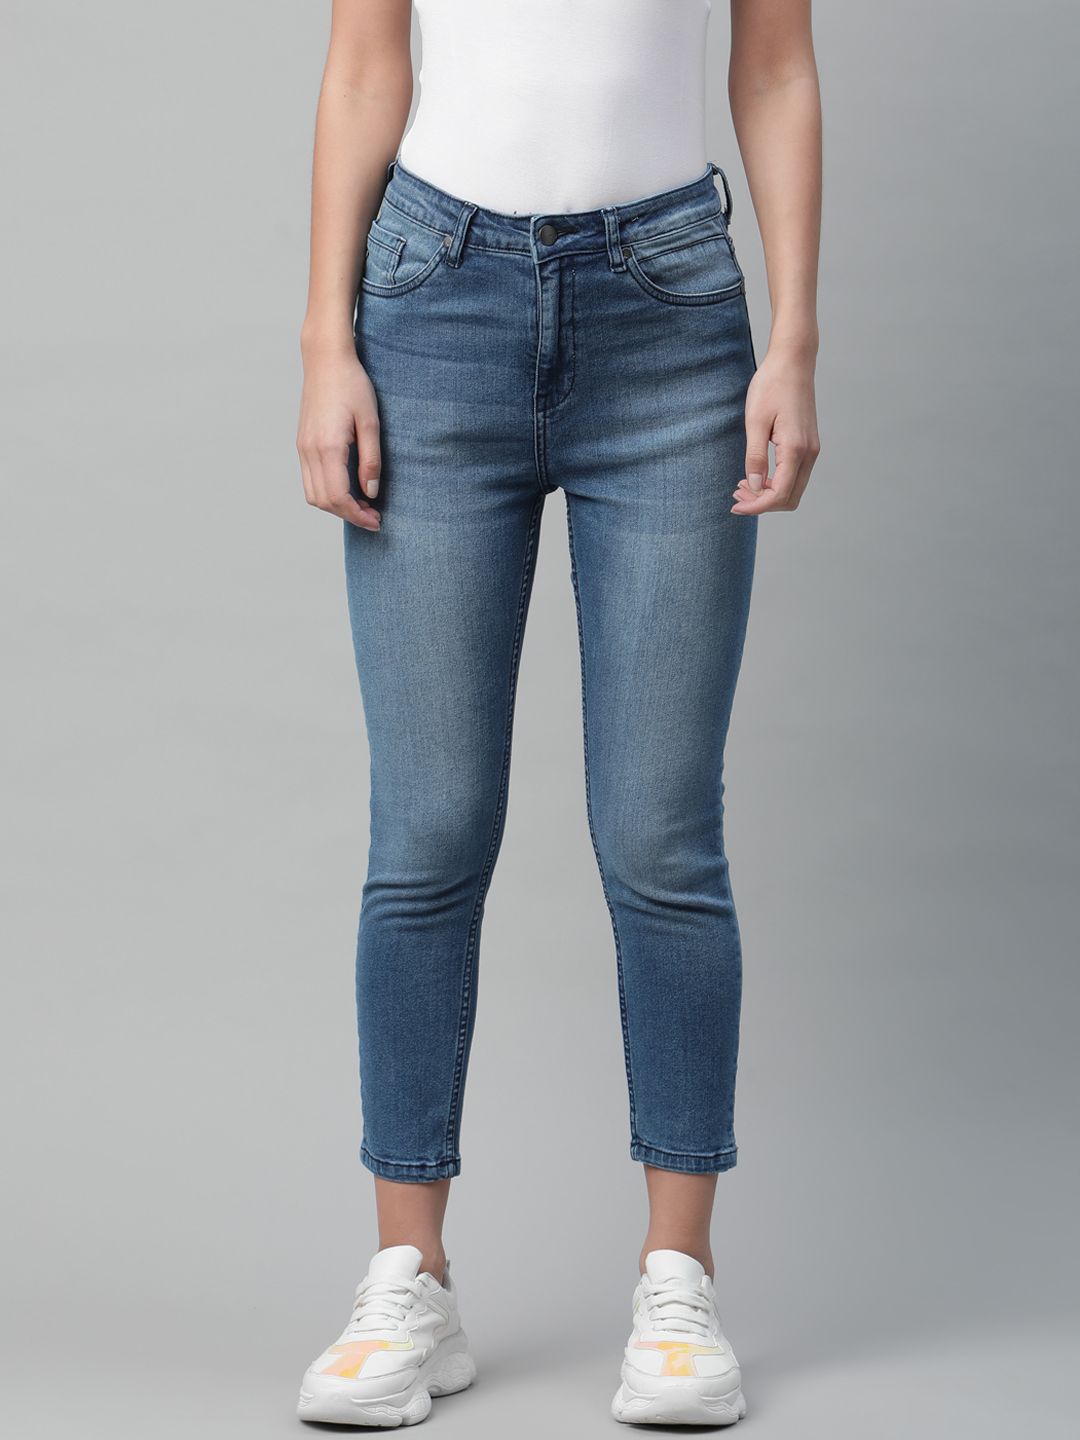 Mast & Harbour Women Blue Skinny Fit Light Fade Stretchable Jeans Price in India